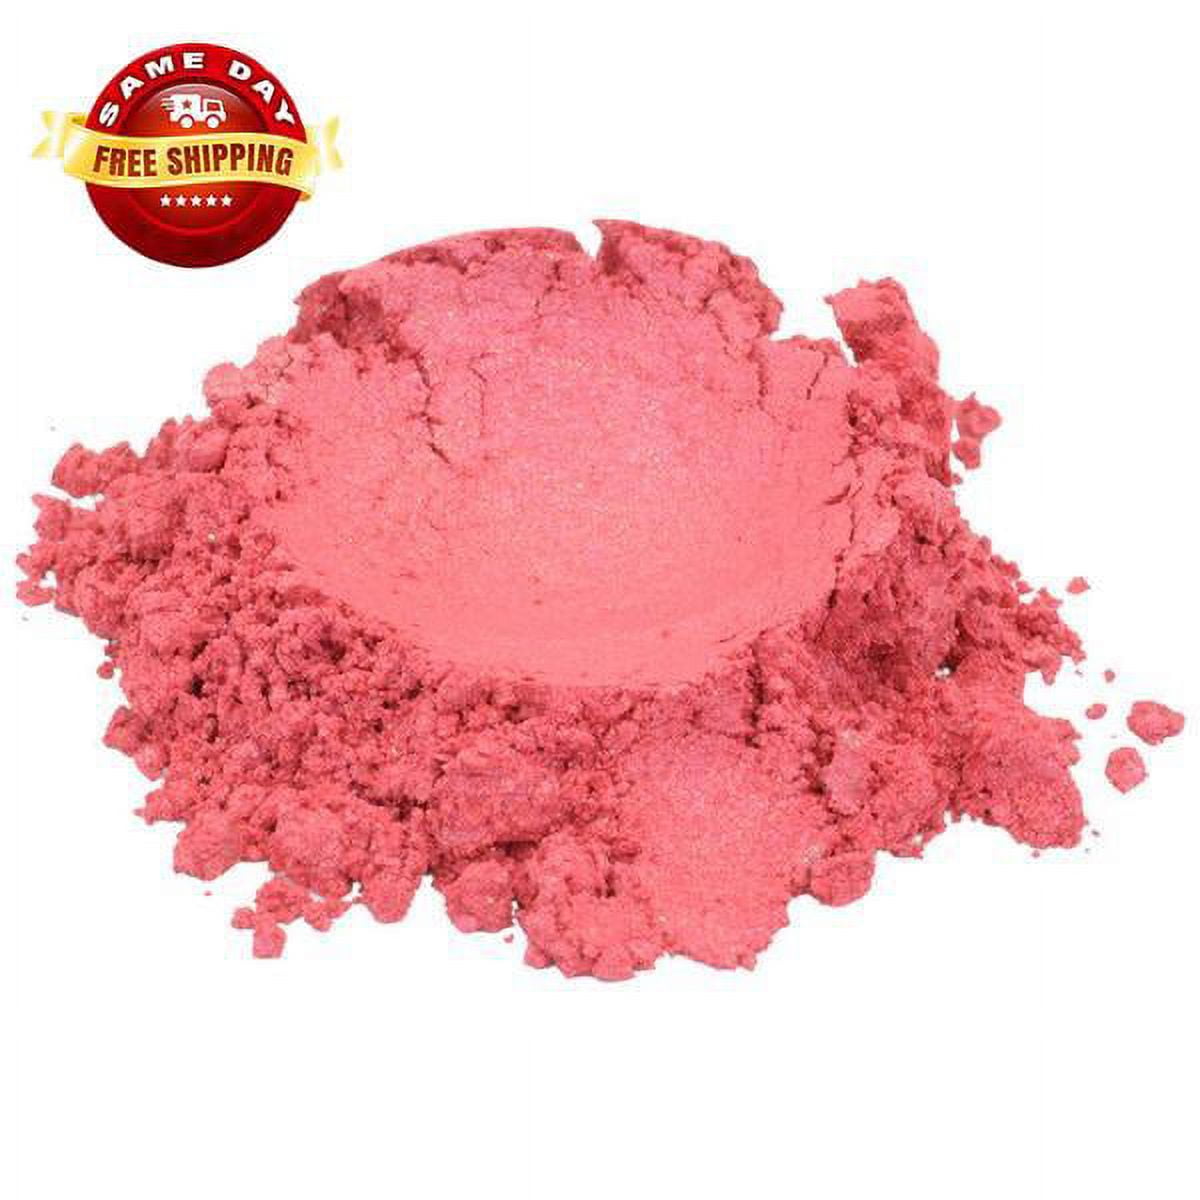 SHIMMER RASPBERRY POP / RED MICA COLORANT PIGMENT POWDER COSMETIC GRADE 1  OZ 